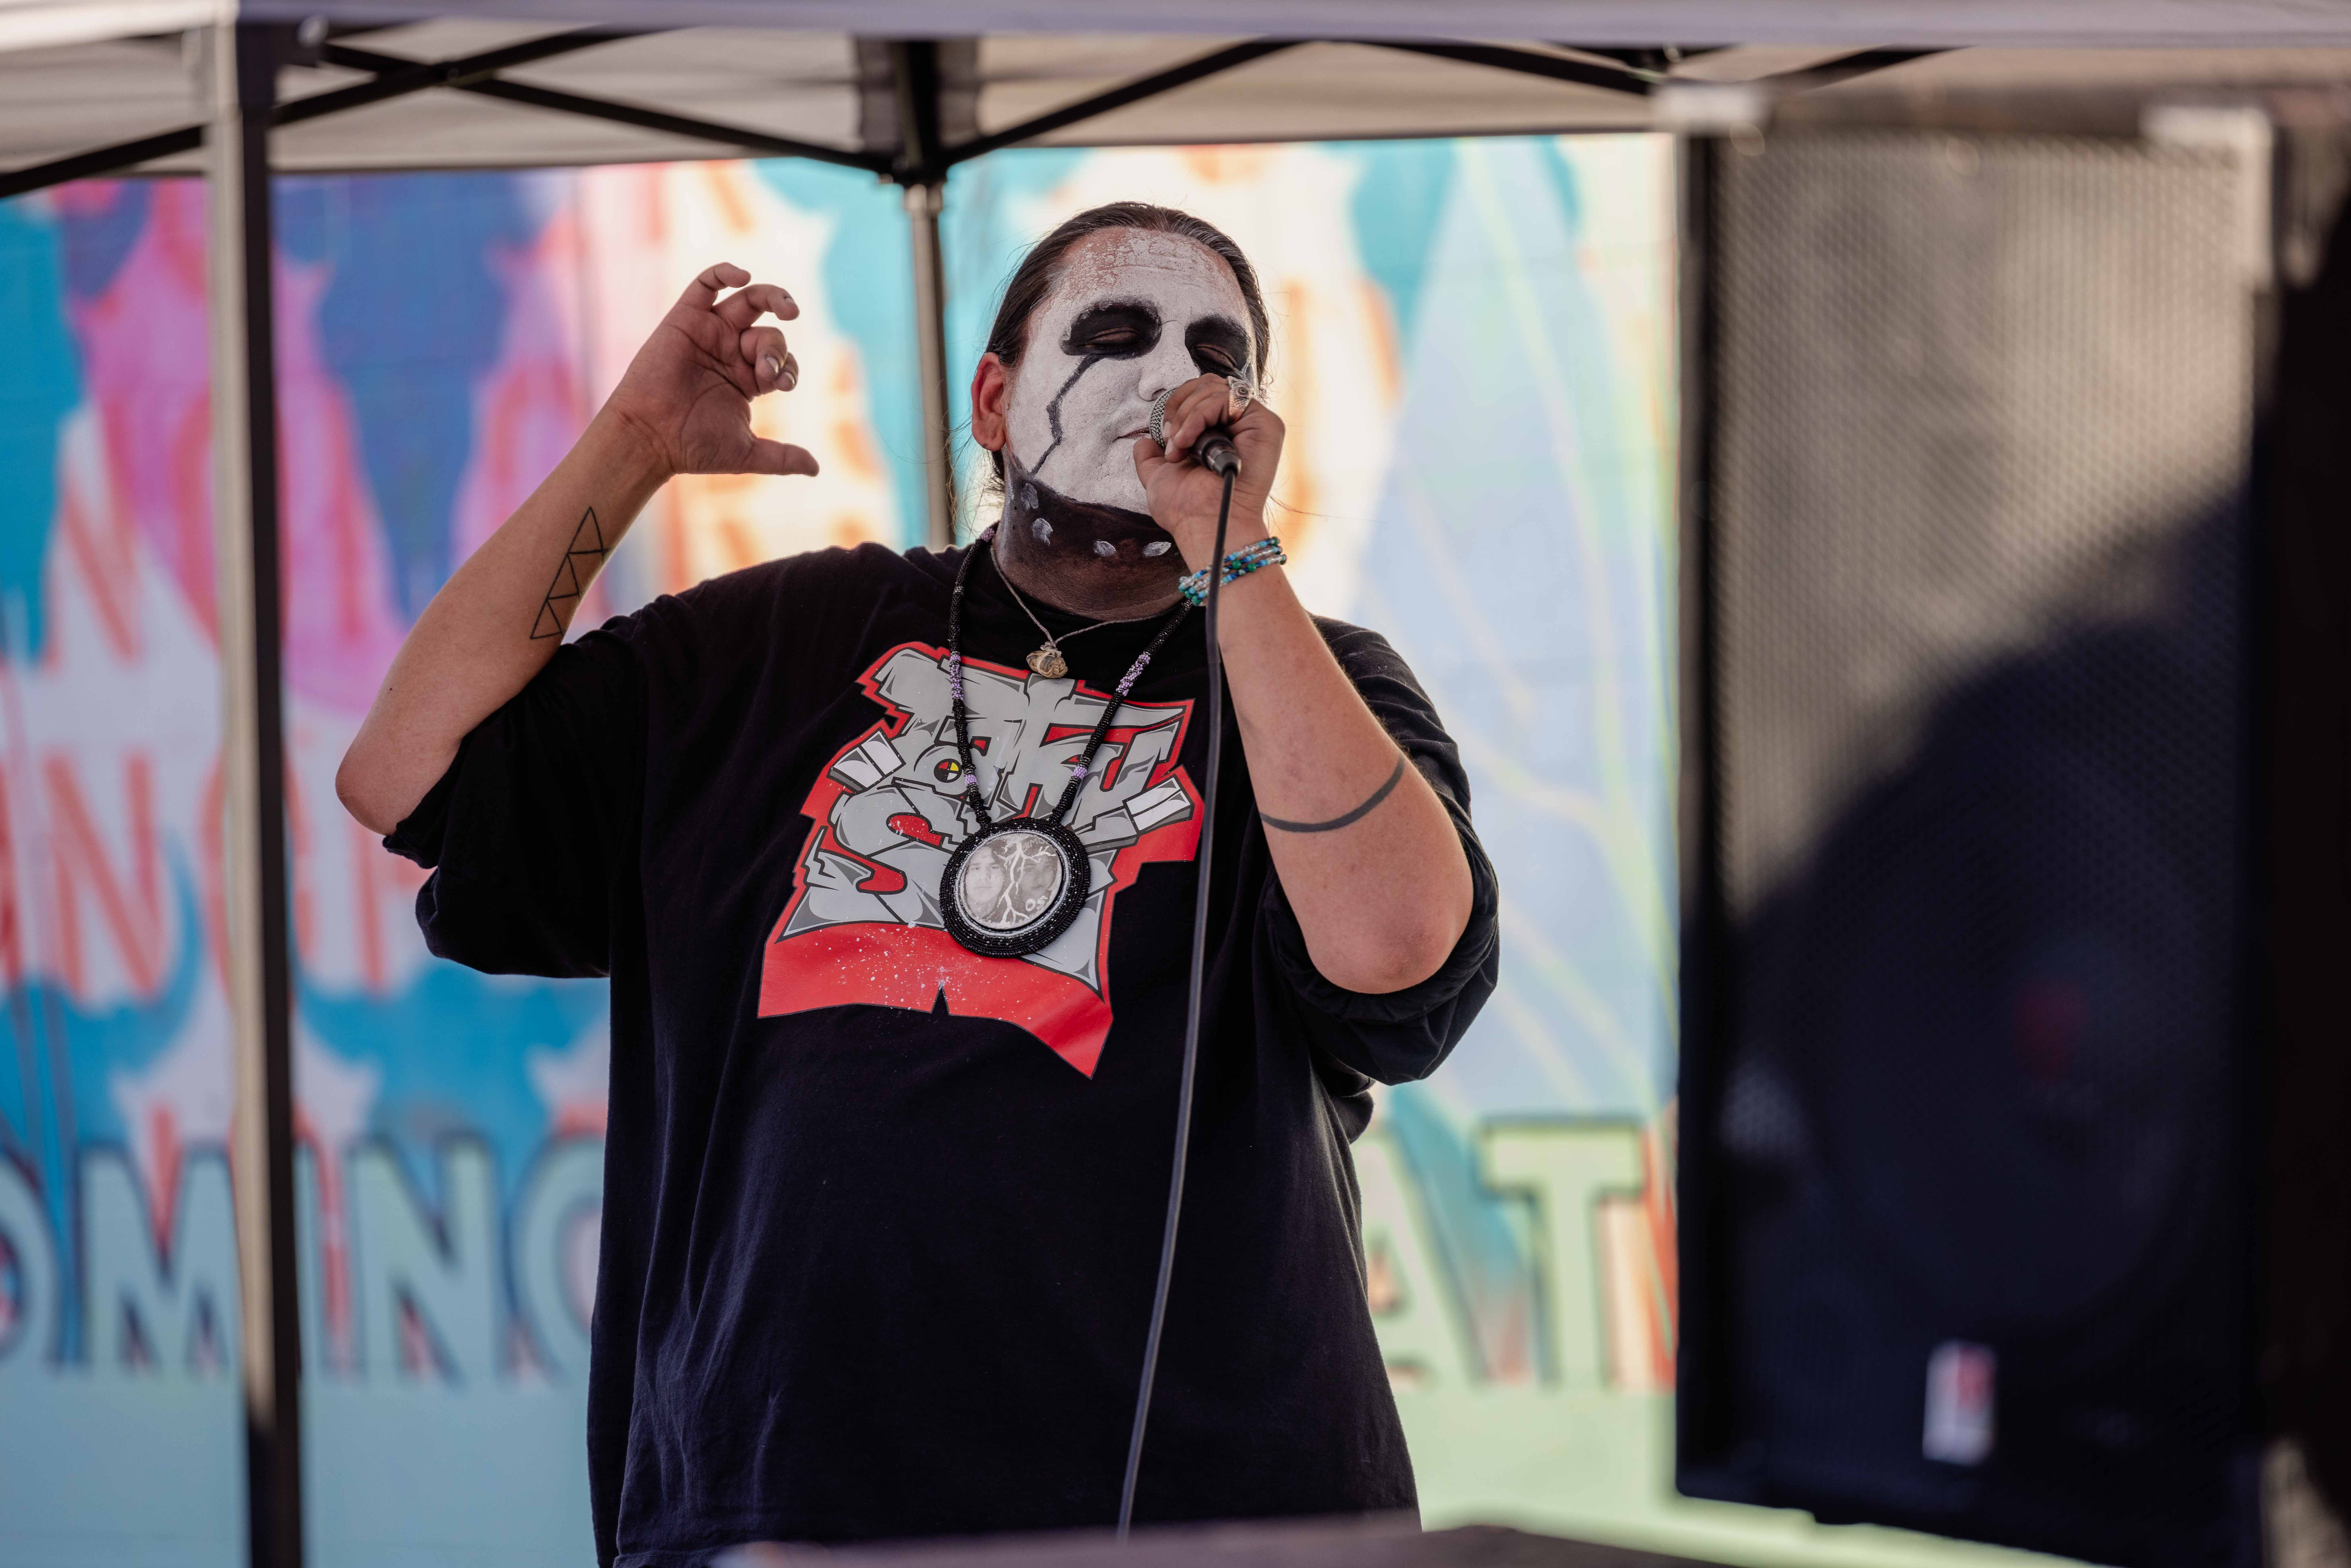 Person with painted face sings with closed eyes into a microphone